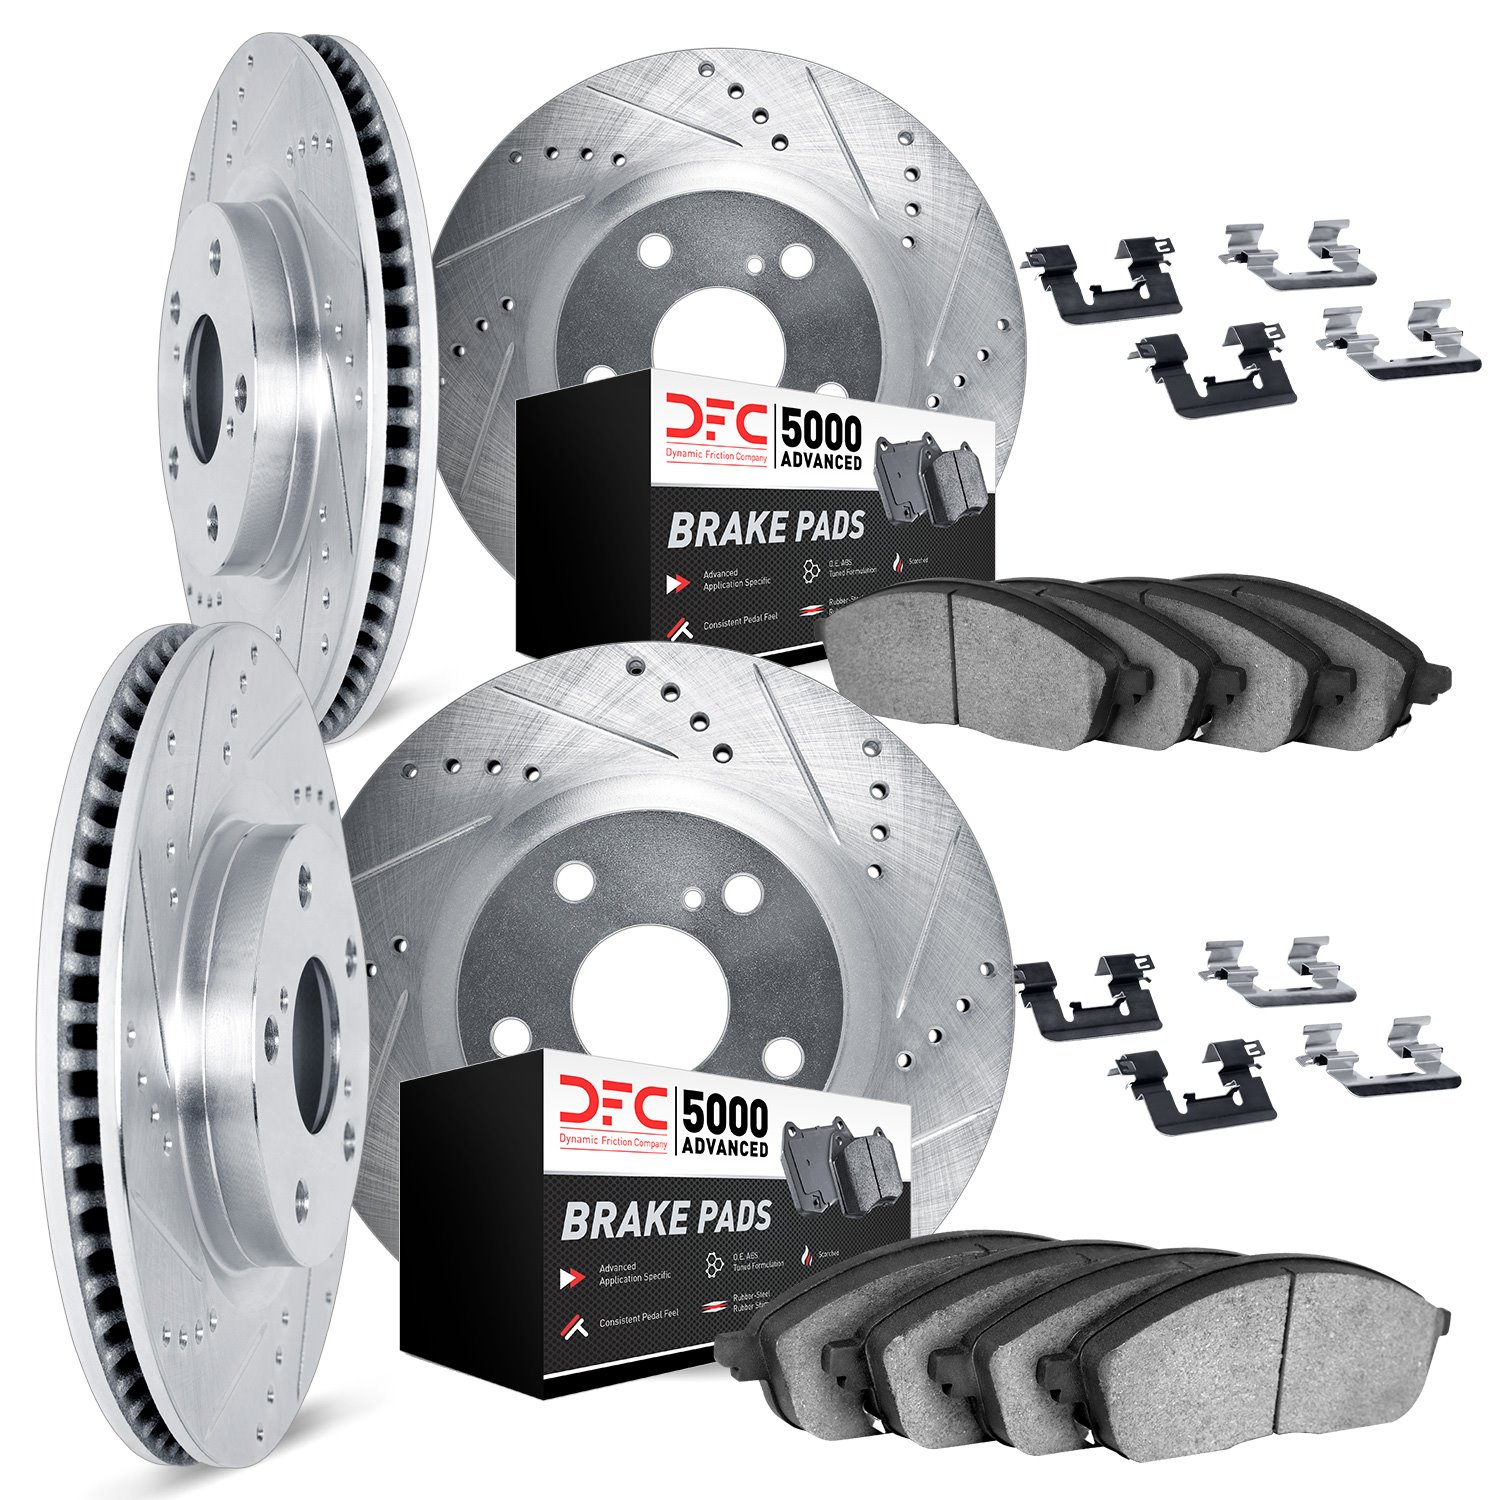 7514-72062 Drilled/Slotted Brake Rotors w/5000 Advanced Brake Pads Kit & Hardware [Silver], 1984-1989 Mopar, Position: Front and